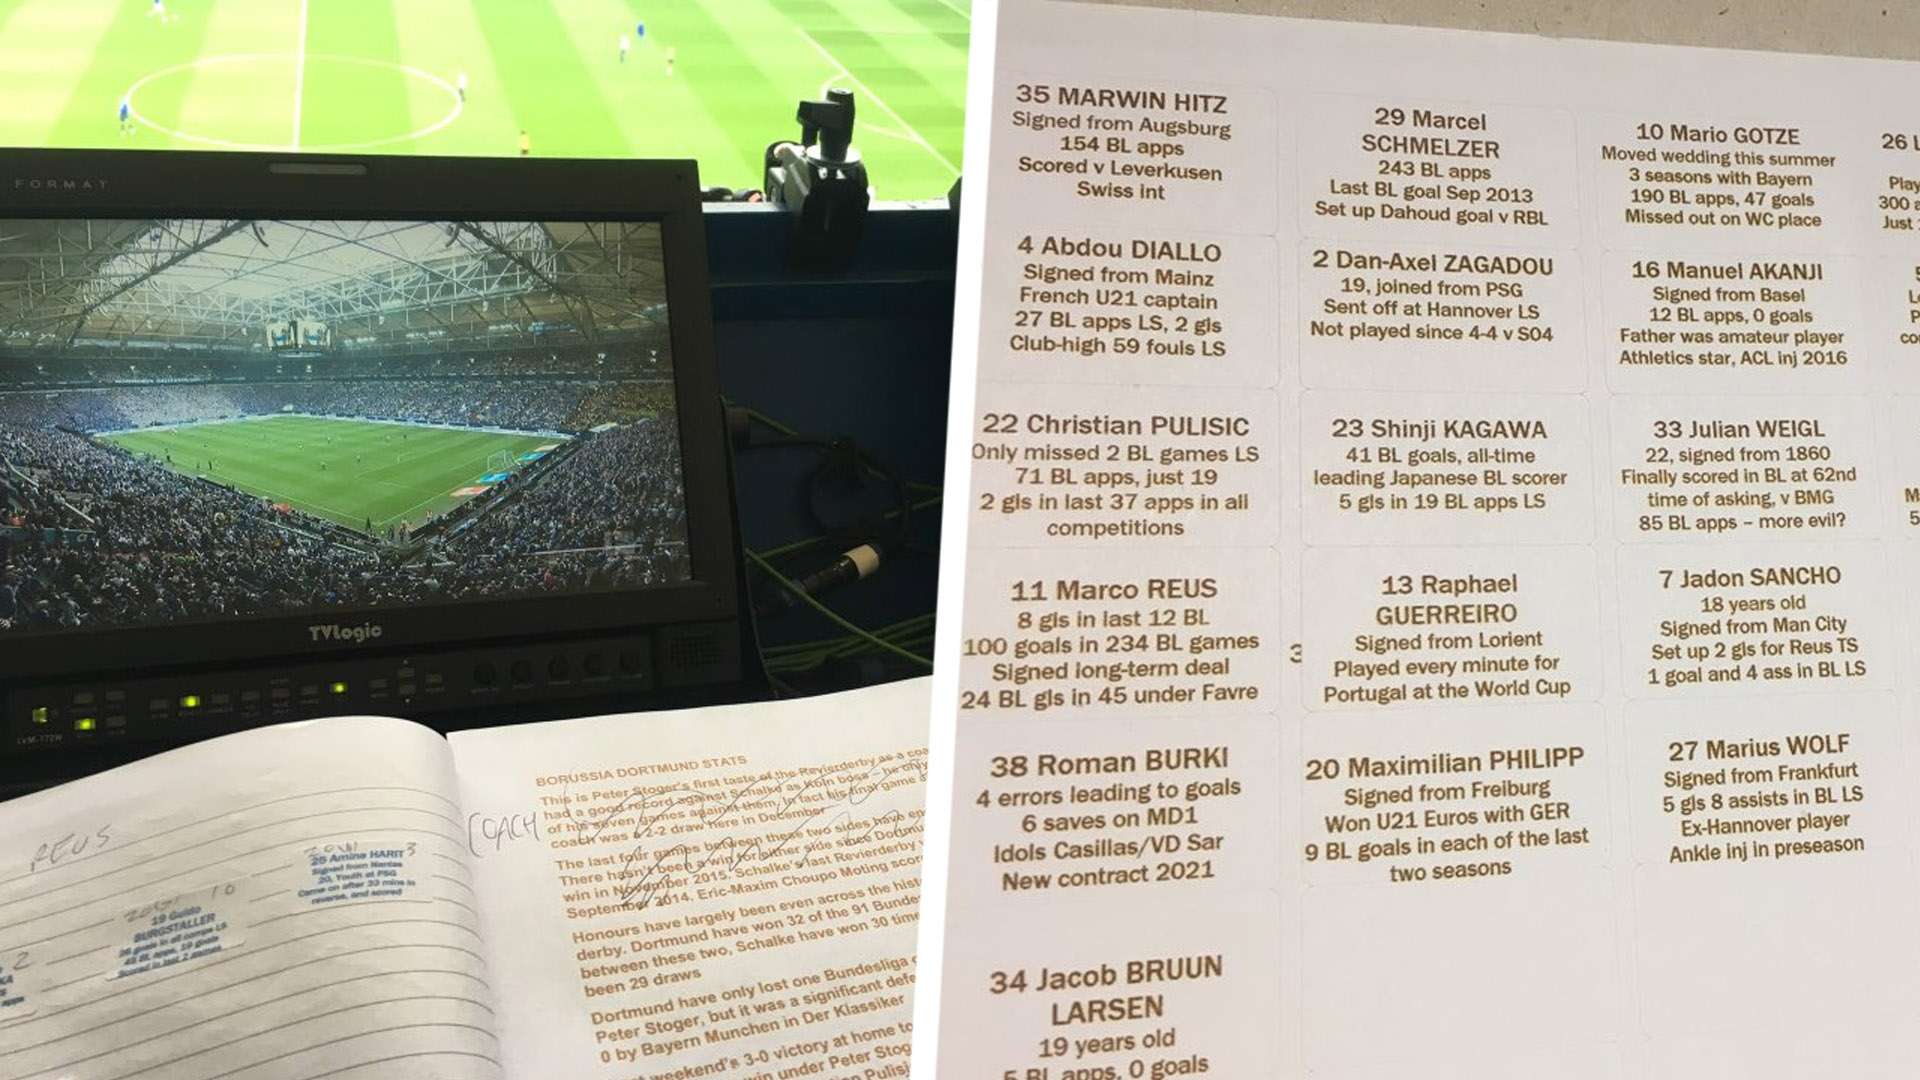 Commentator's notes